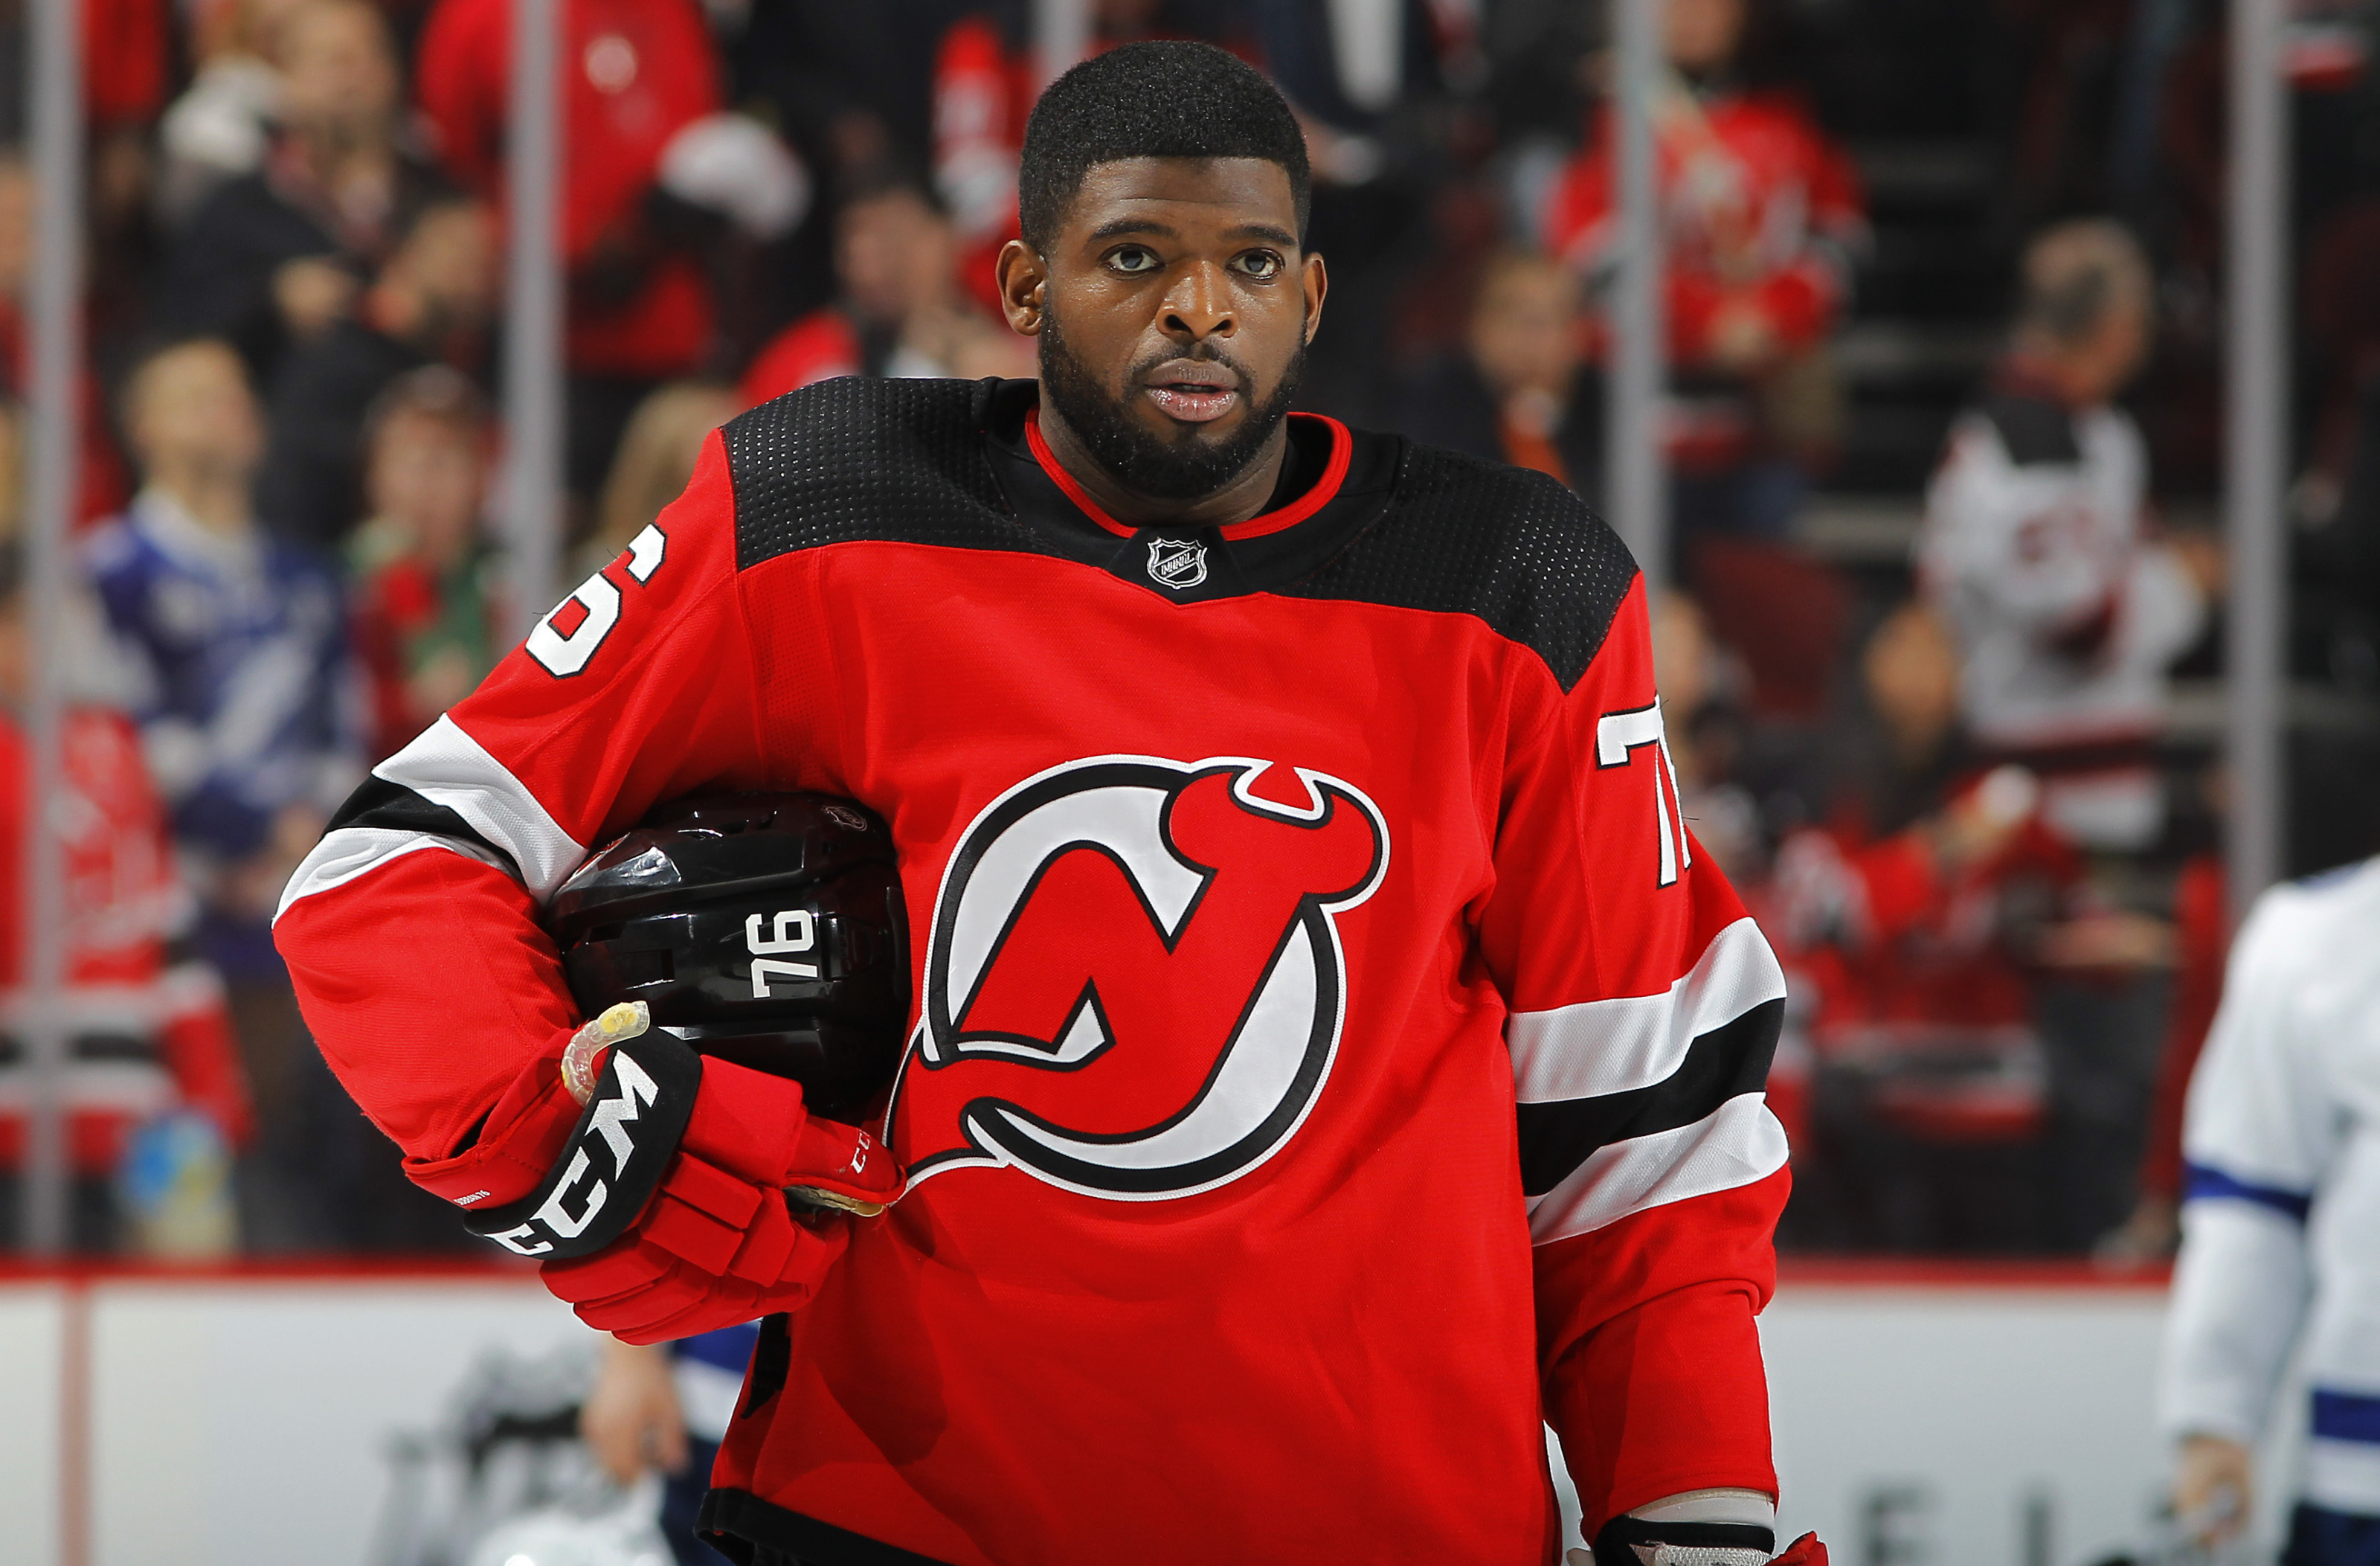 P.K. Subban on X: This pic was taken before the game fooling